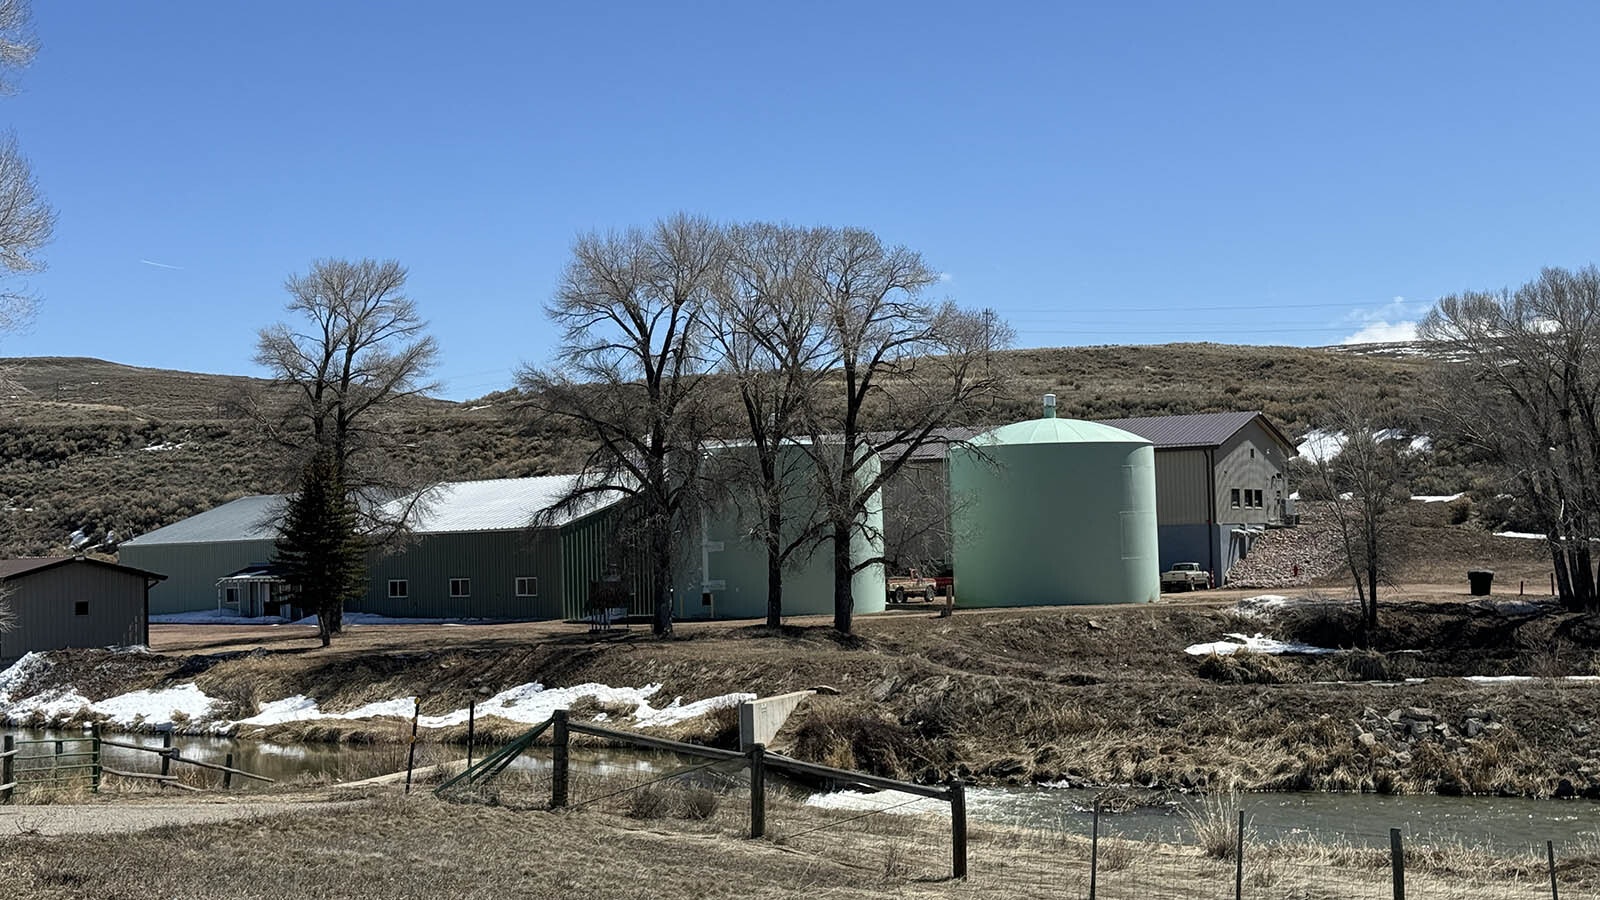 The Kemmerer water treatment plant can handle thousands of new residents who may come to town, even with billions of dollars of investment in new energy projects expected to come to the region in the next few years.